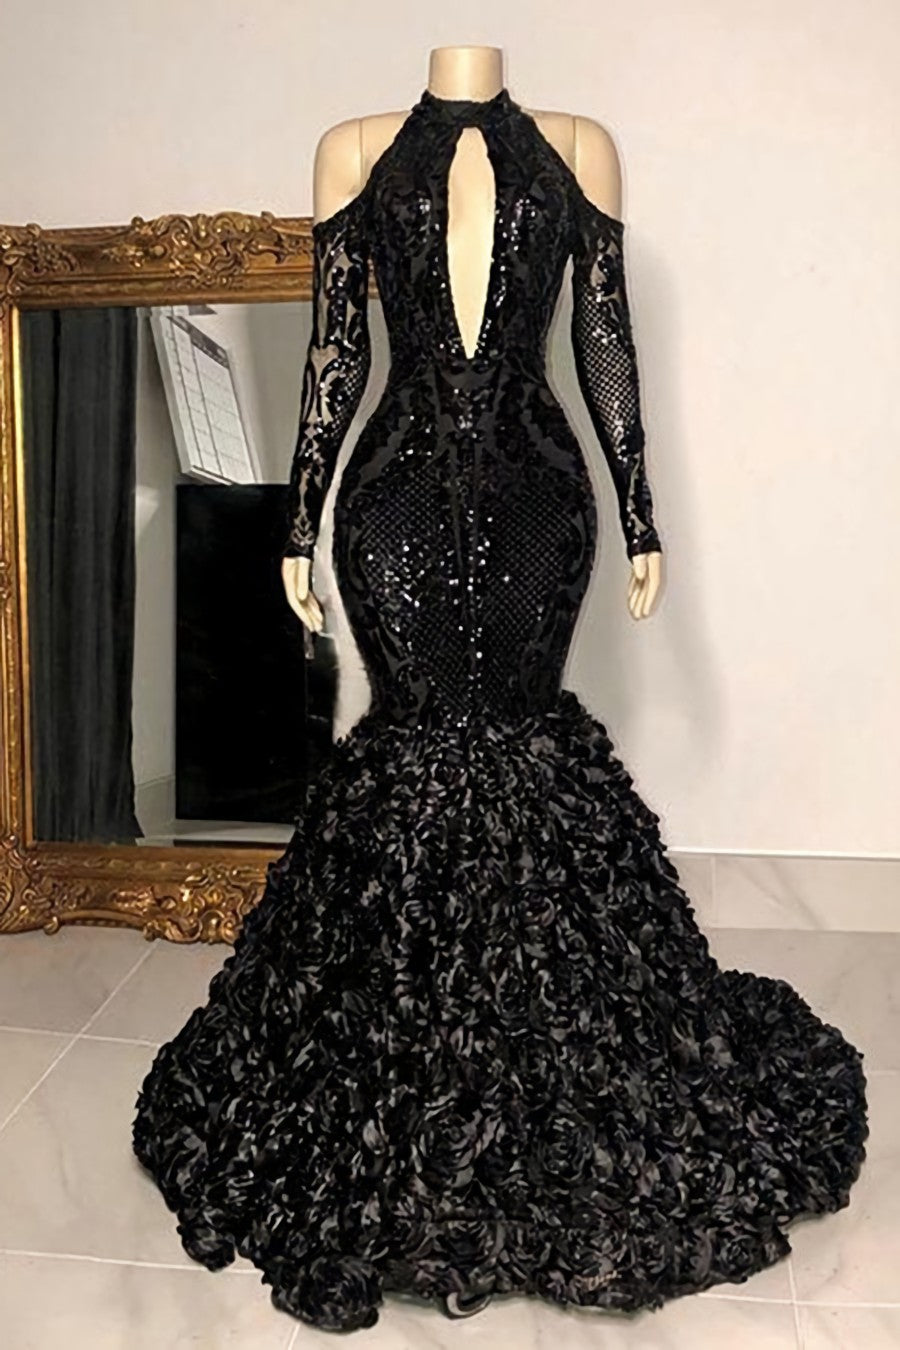 Strapless Dress, Dignified Black Halter Long Sleeve Transparent Lace Sequin Mermaid Prom Dresses